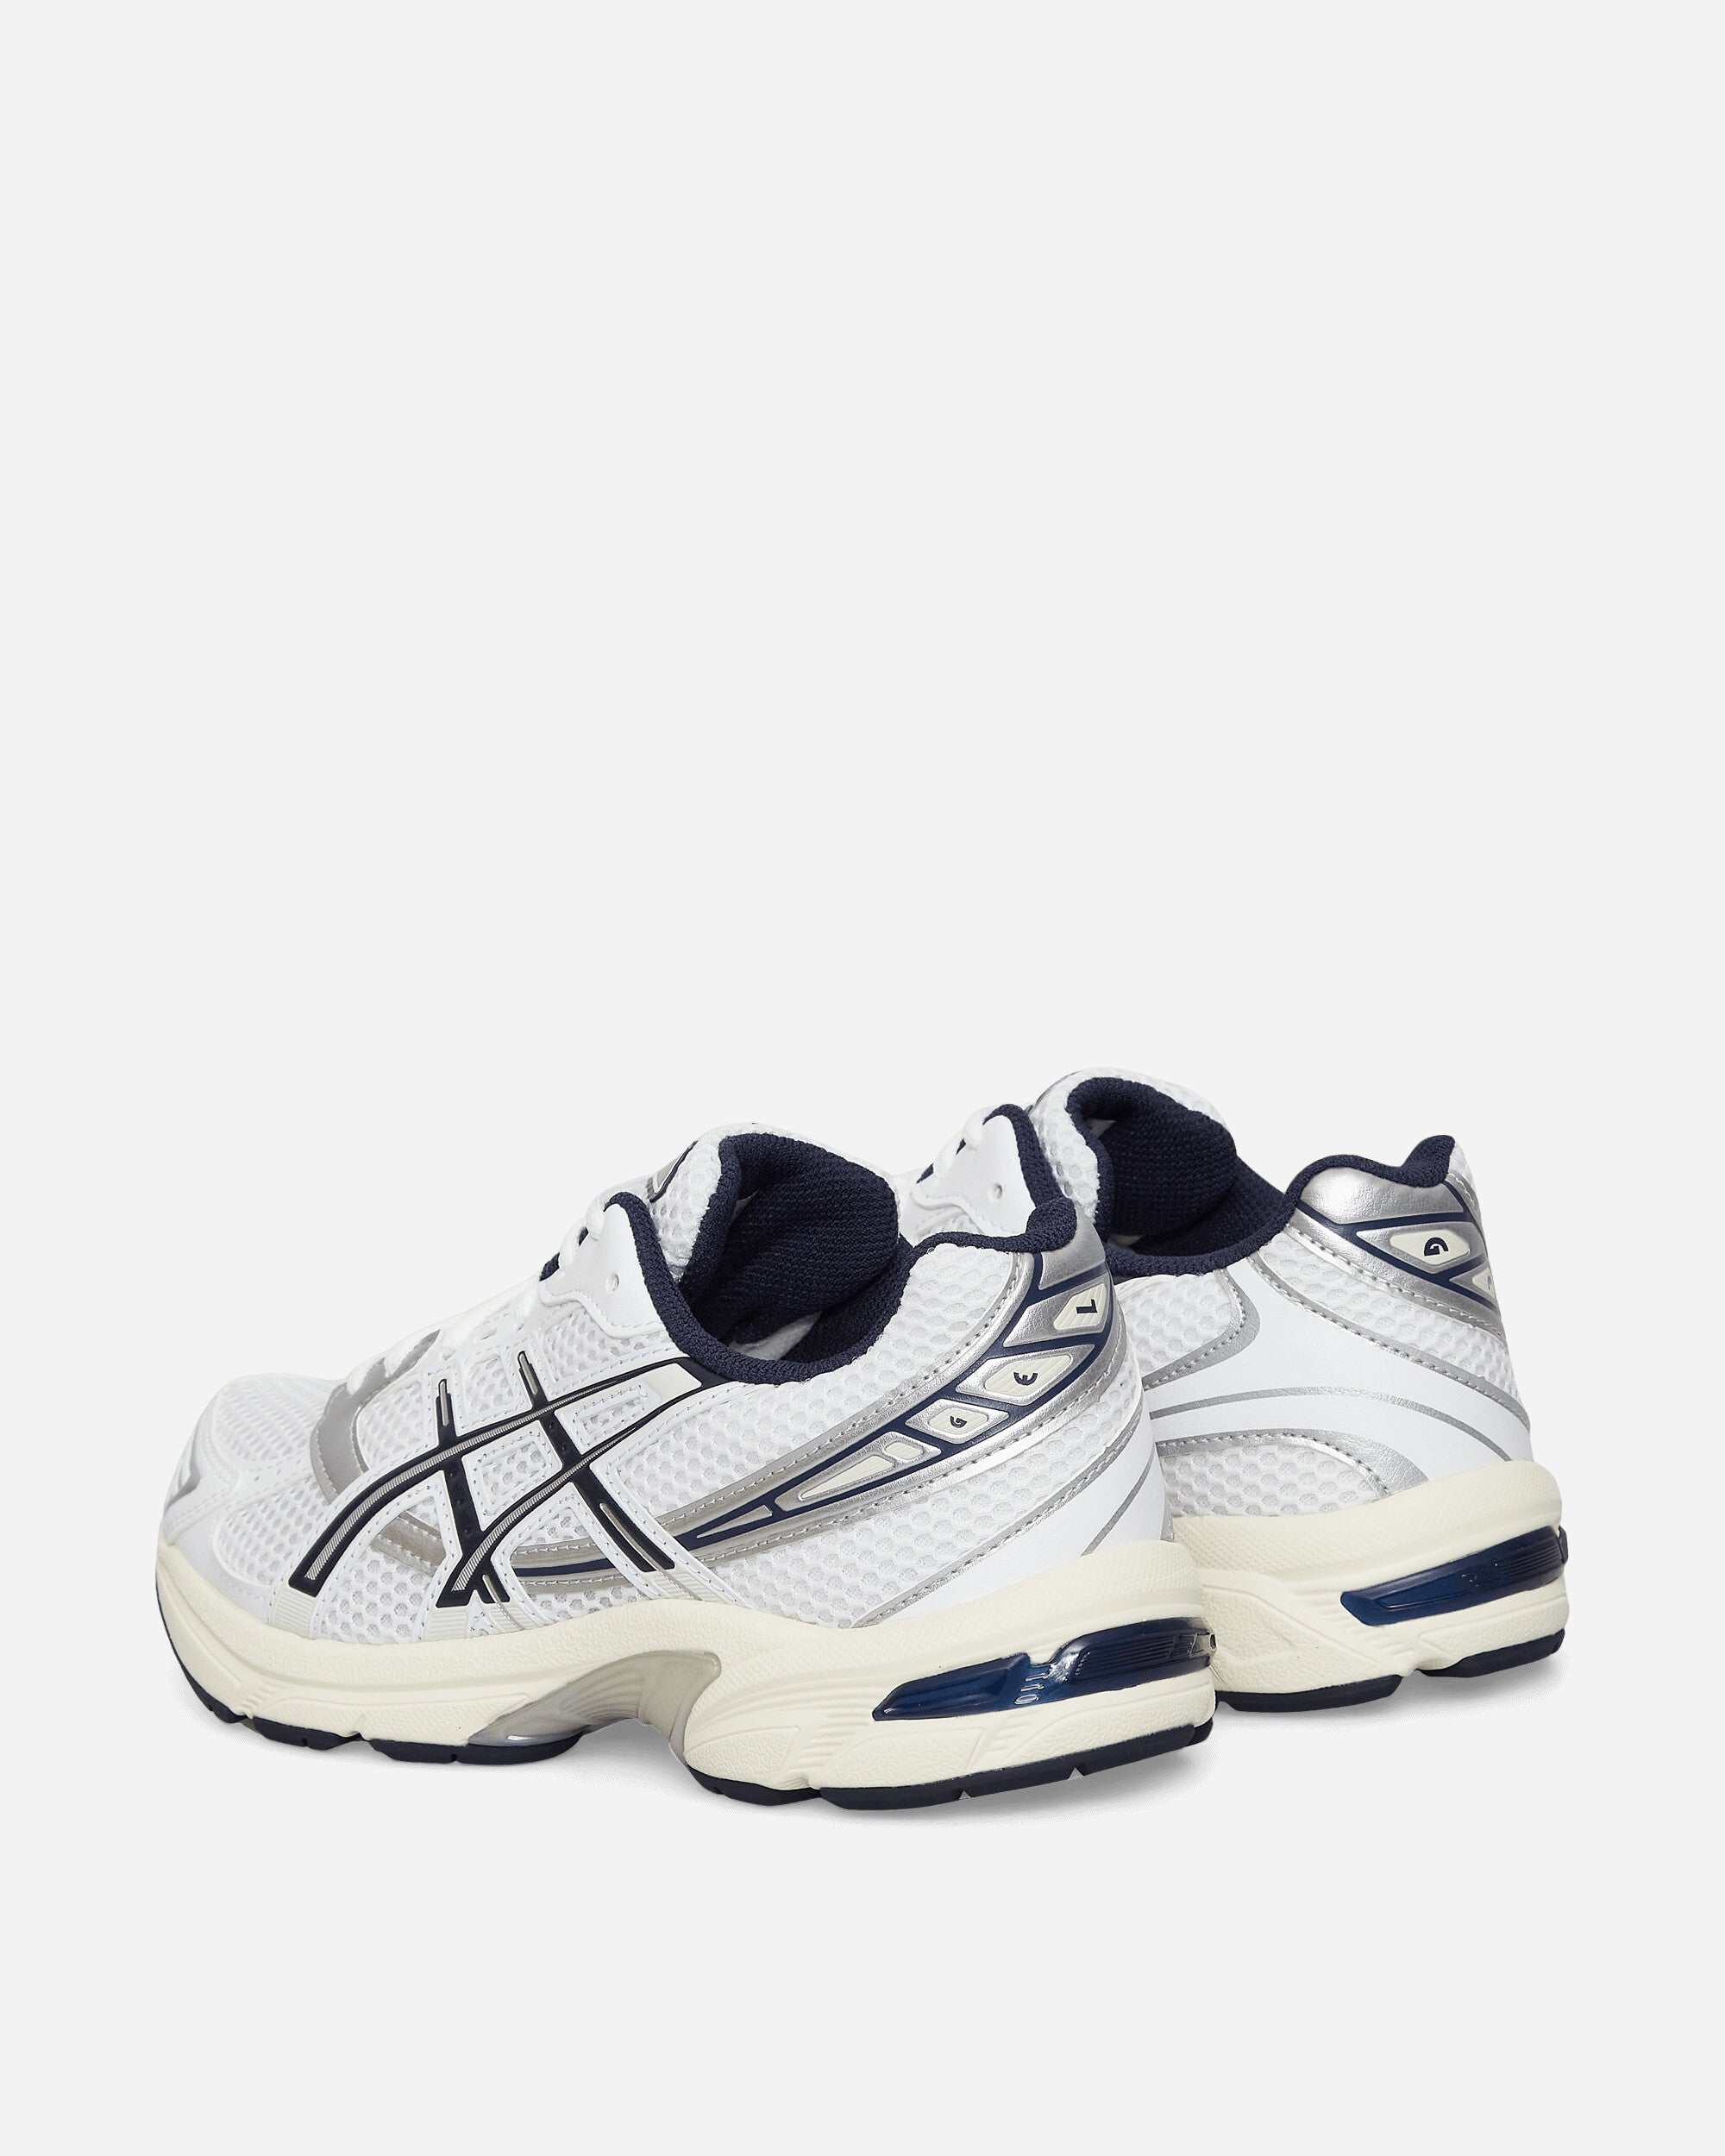 Asics Wmns Gel-1130 White/Midnight Sneakers Low 1202A164-110